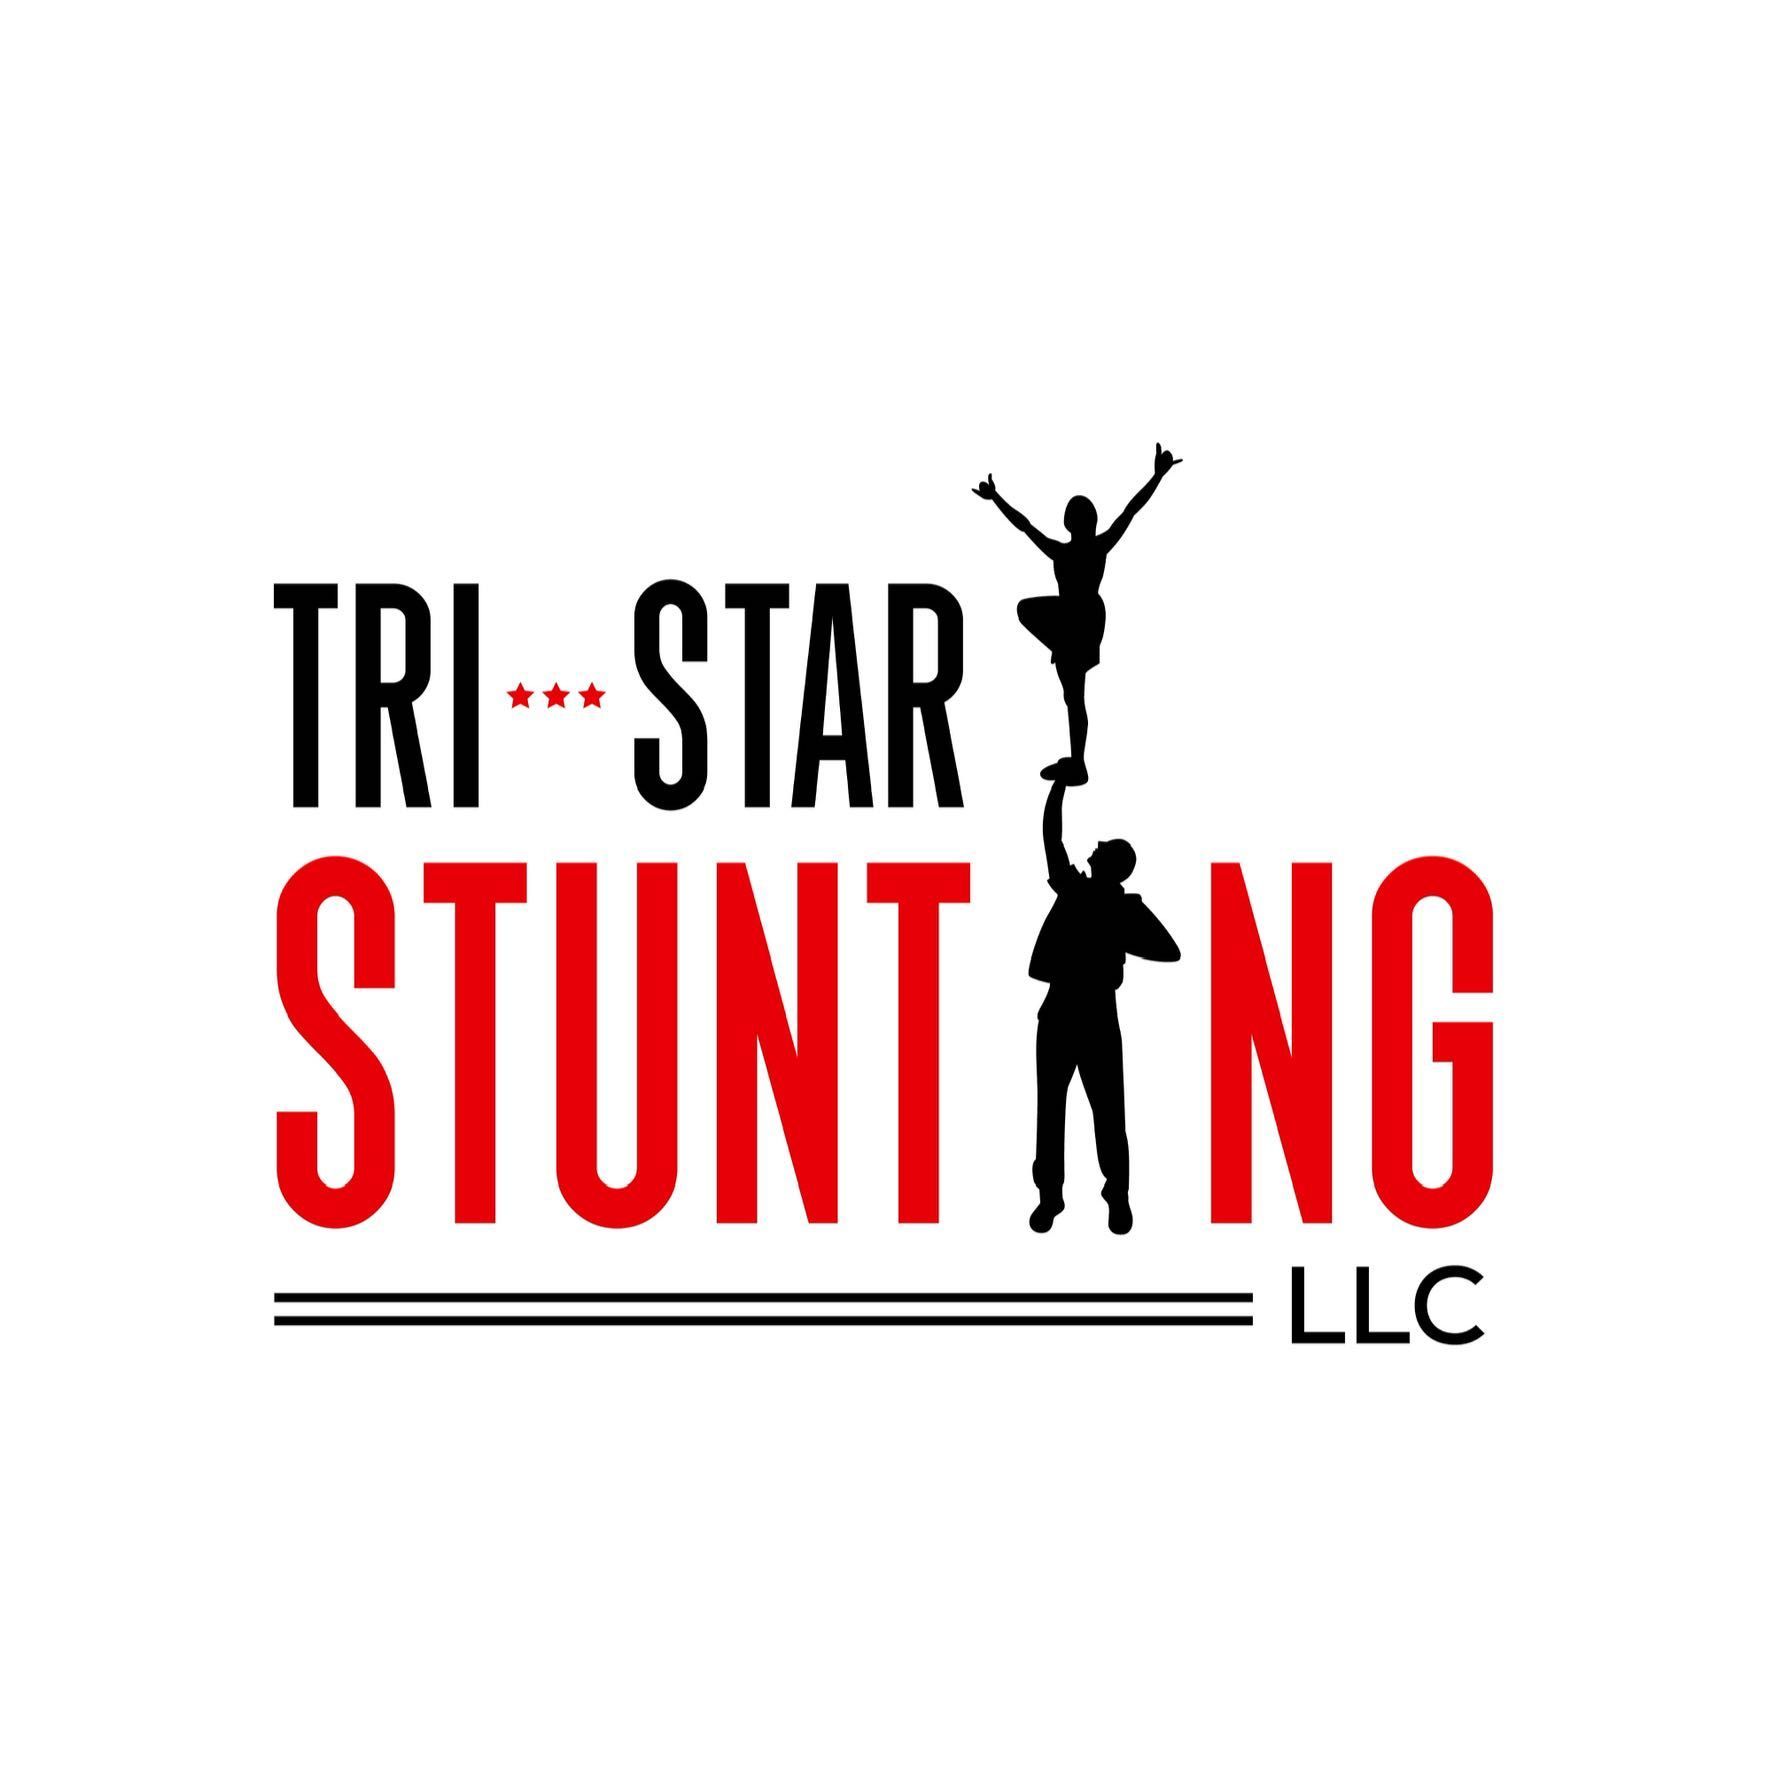 Tri-Star Stunting LLC, 11250 Gilbert Rd, Knoxville, TN 37932, United States, Knoxville, 37932